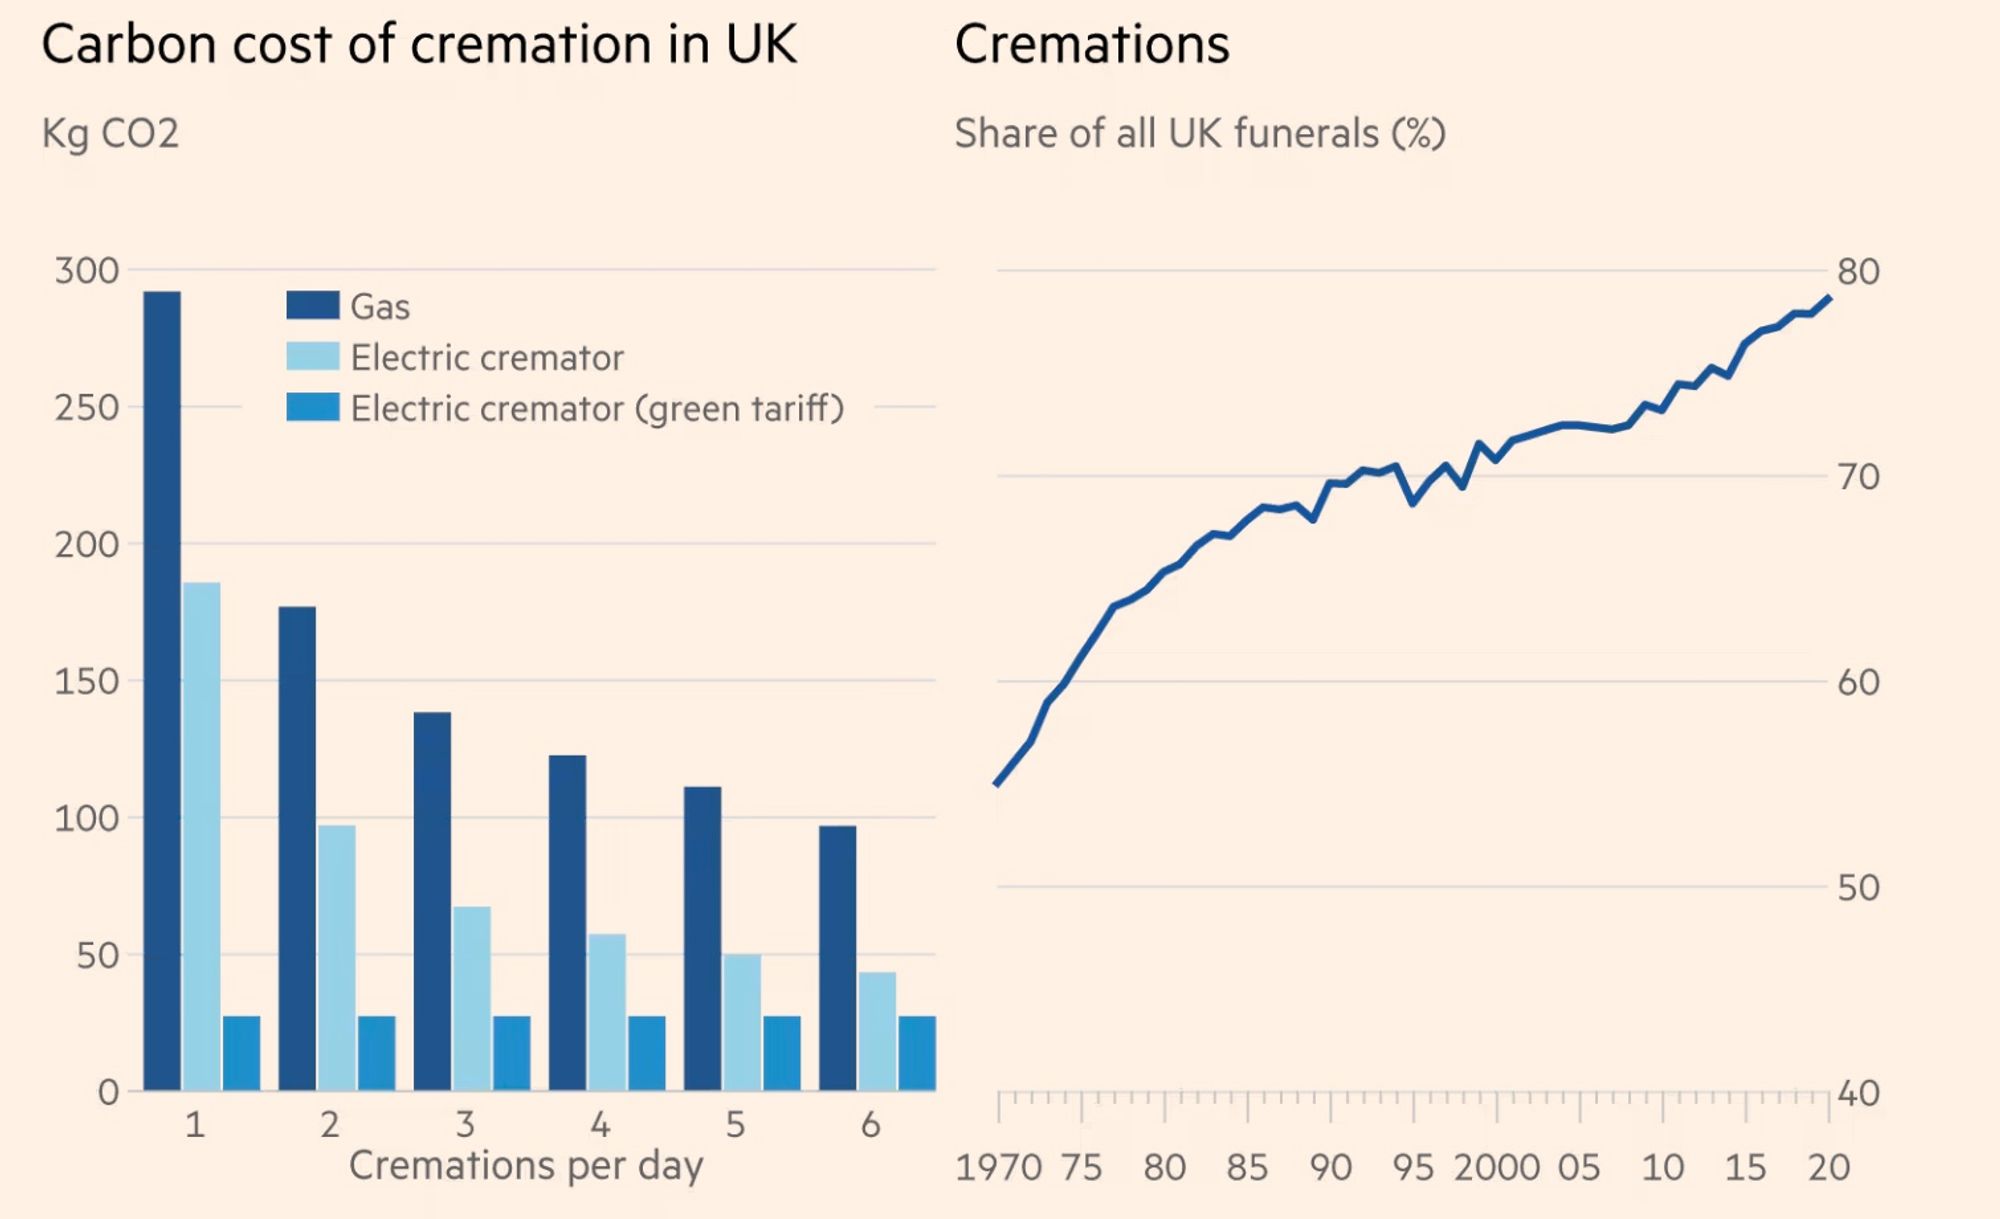 Carbon cost of cremations - Source: Financial Times, 2023